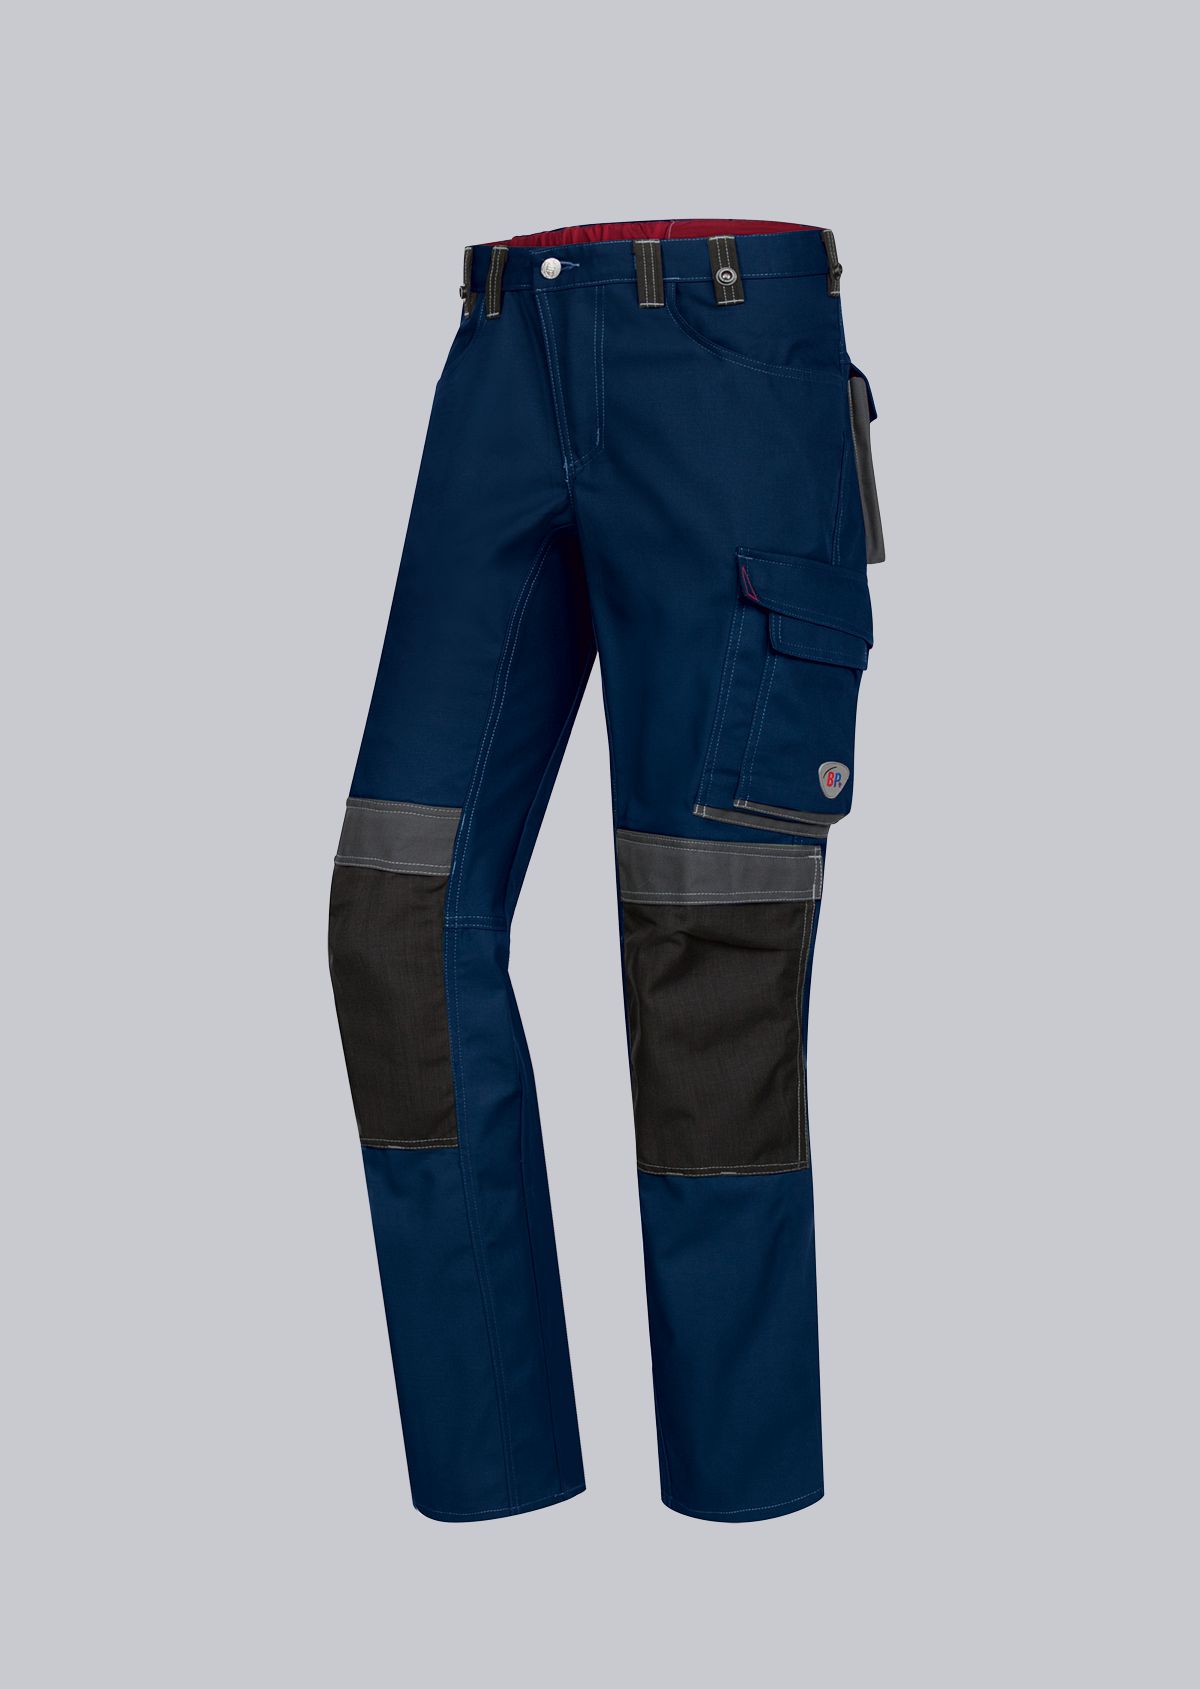 BP® Comfort work trousers with knee pad pockets